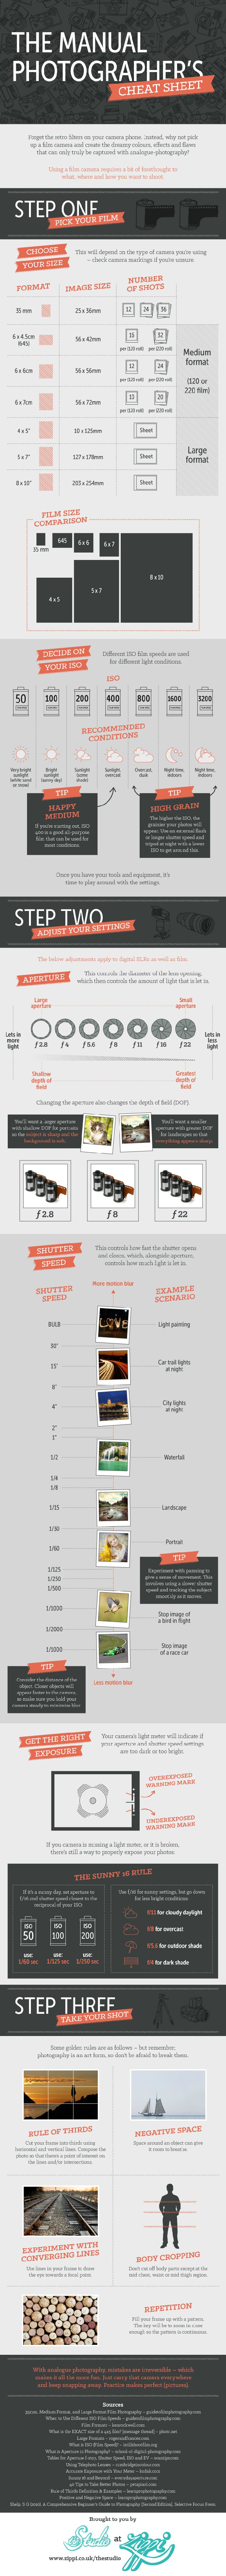 The manual photographers cheat sheet infographic